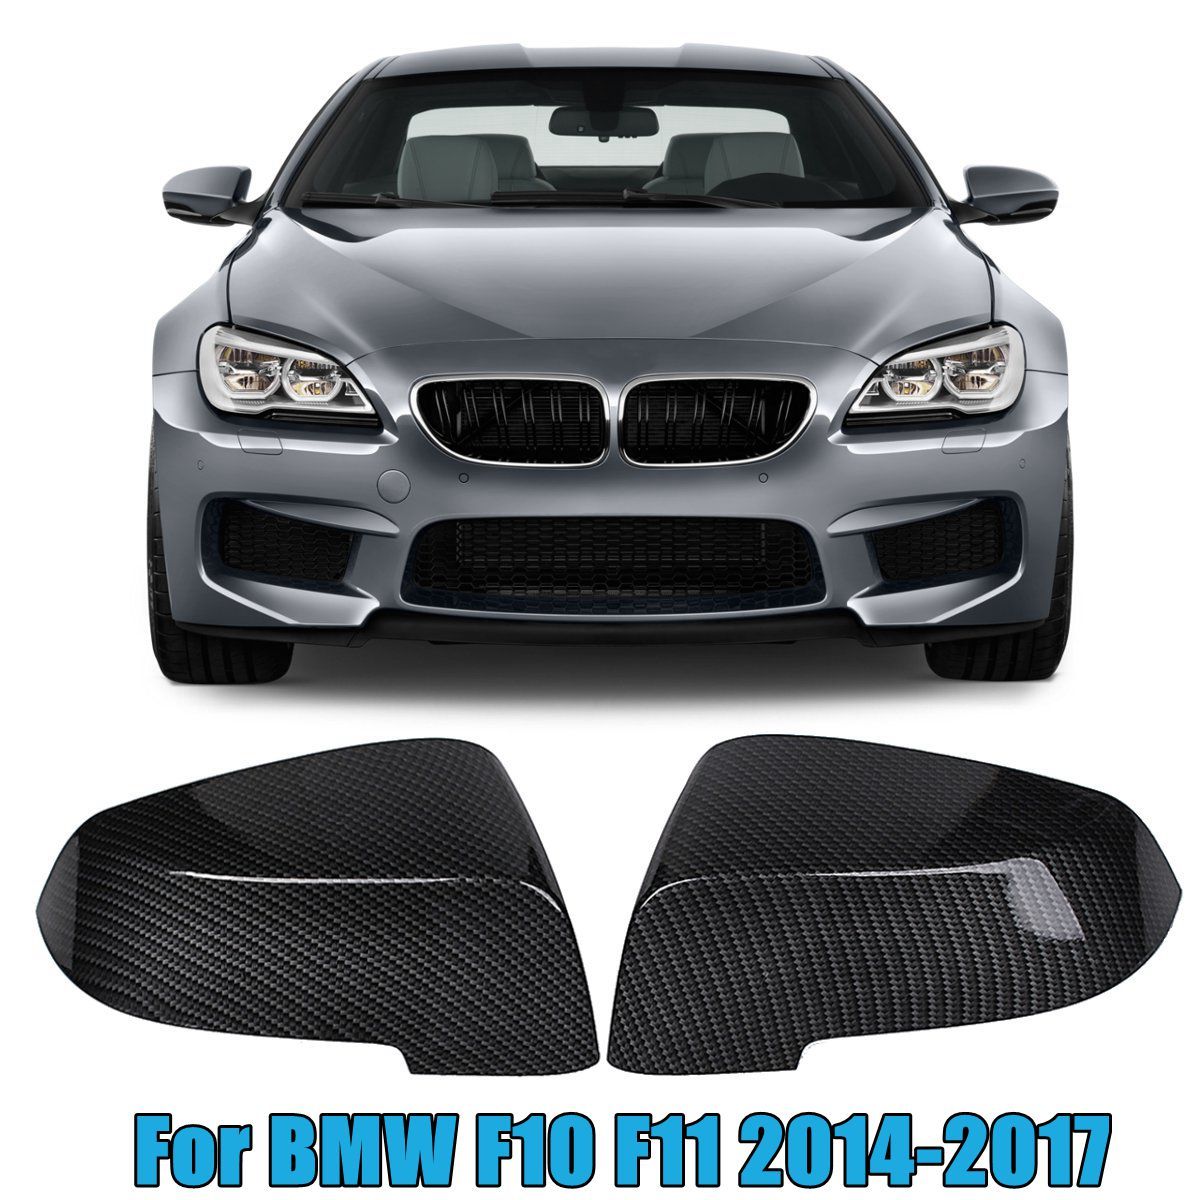 2Pcs-Carbon-Fiber-Side-Wing-Rear-View-Mirror-Covers-Caps-For-BMW-F10-F11-2014-2017-1662848